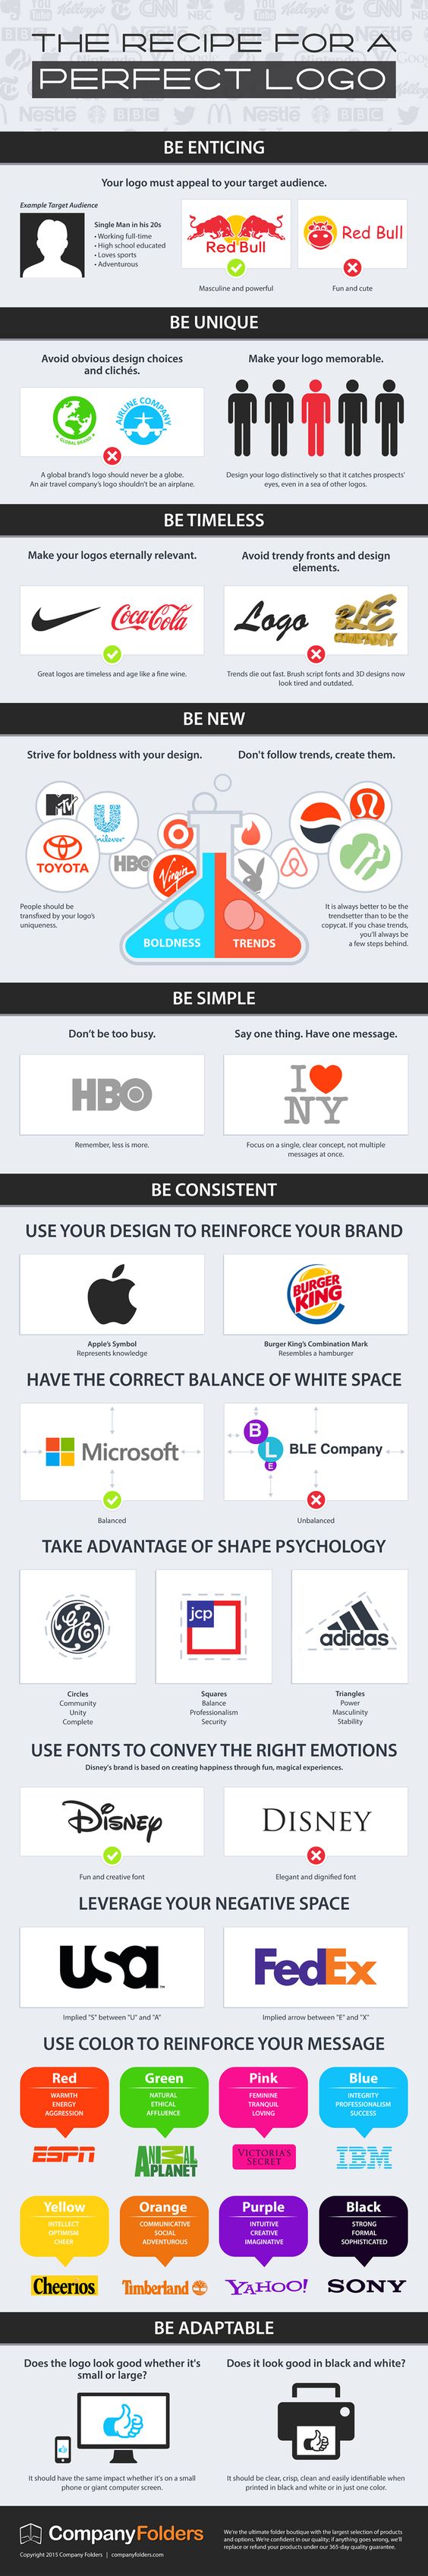 The Recipe For A Perfect Business Logo (Infographic) - How To Design